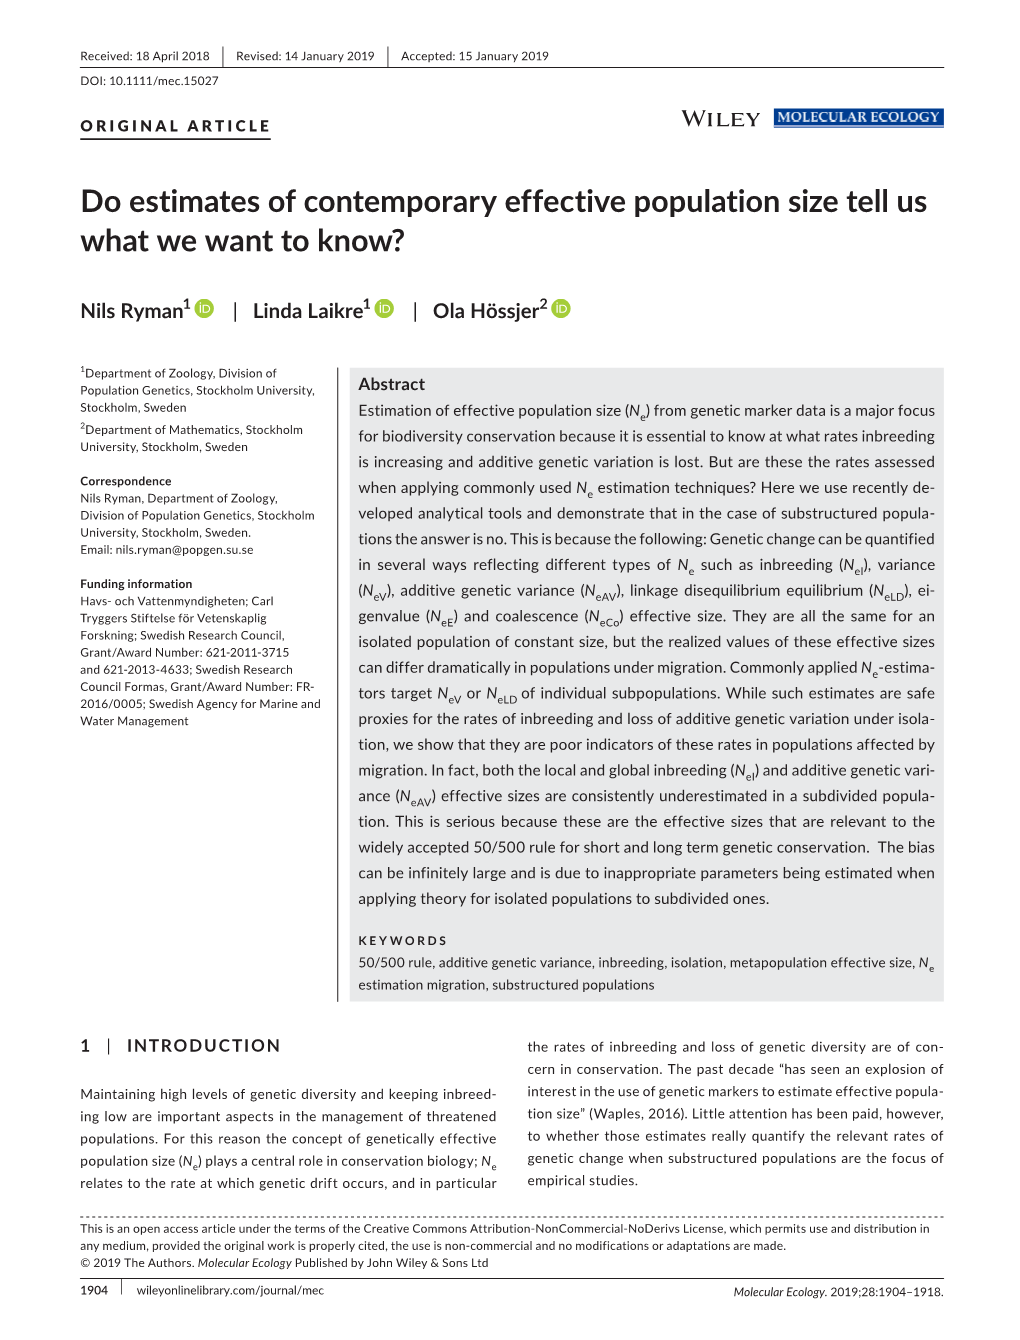 Do Estimates of Contemporary Effective Population Size Tell Us What We Want to Know?